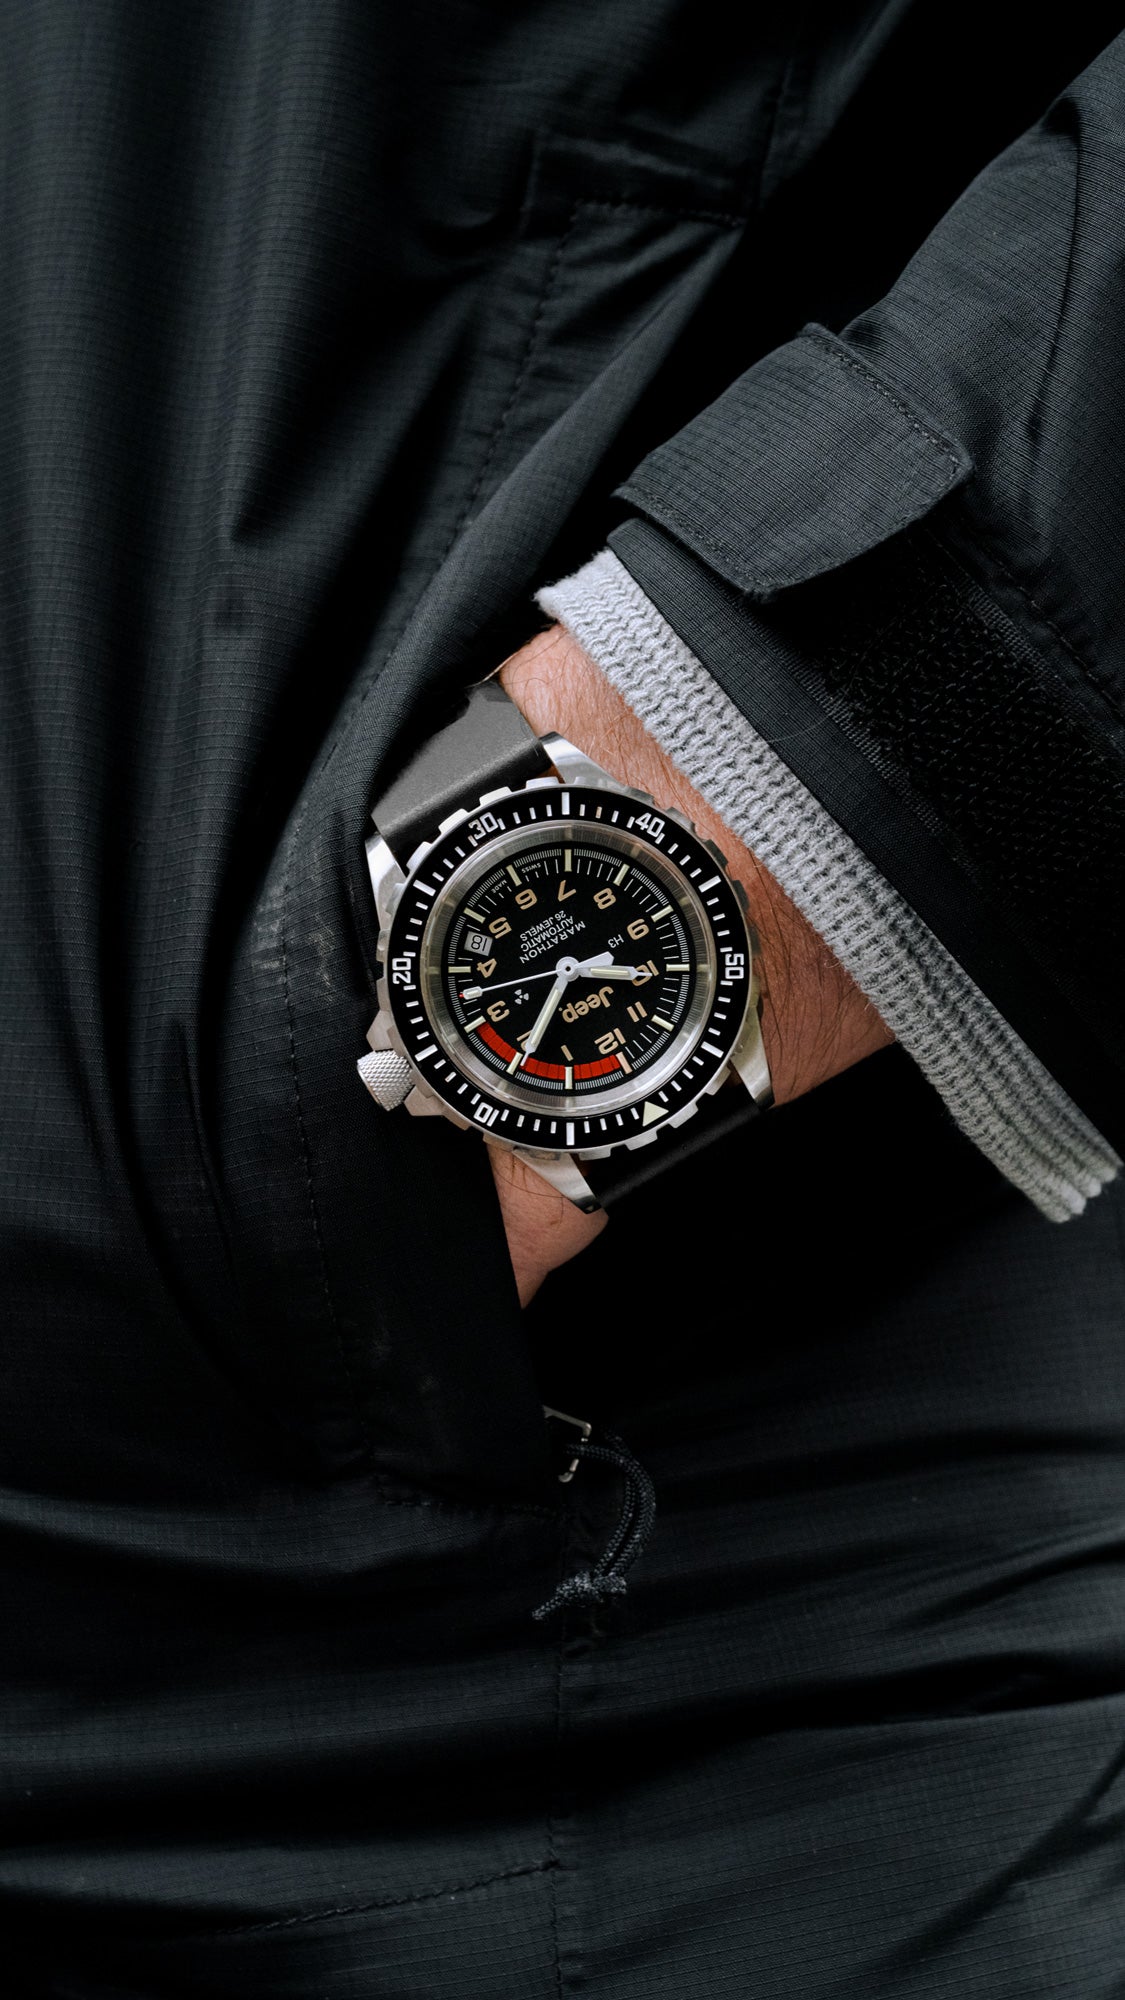 Marathon Watch Company - Swiss Made Authentic Military Watches